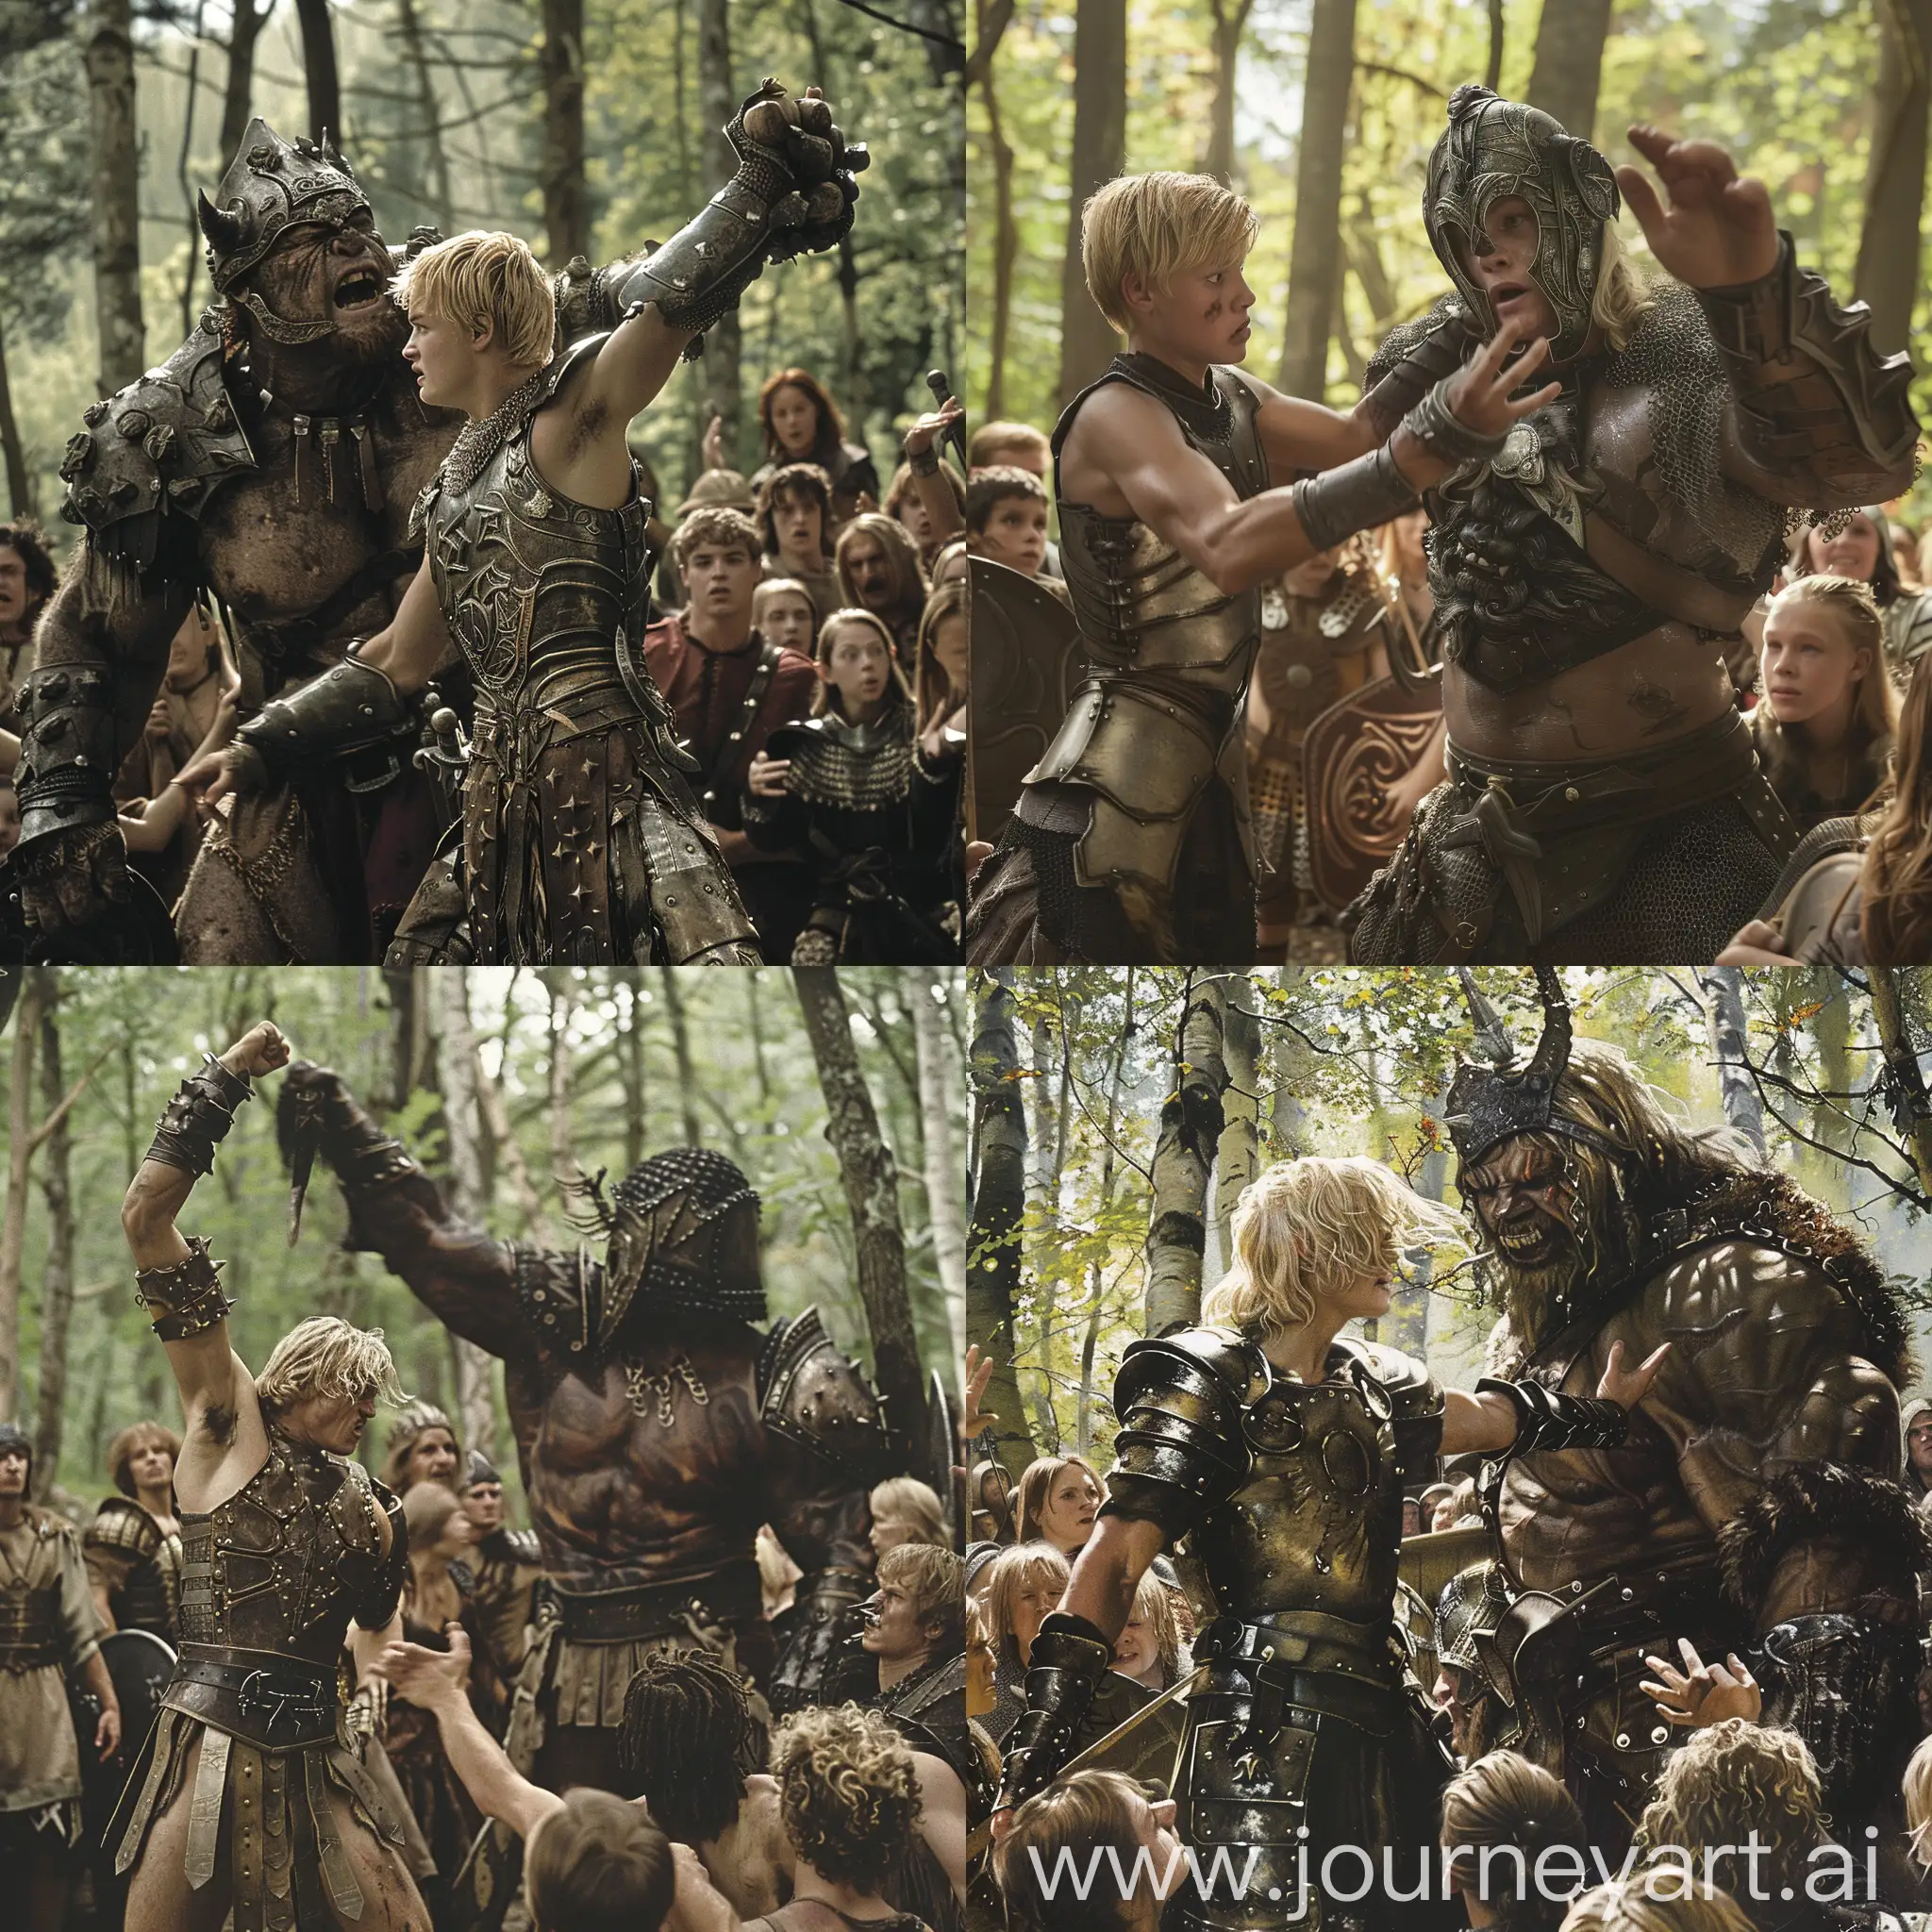 Cinematic scene from a movie where a young, thin blond warrior dressed in iron armor without a helmet is fighting with a giant barbarian warrior in the forest, they are surrounded by citizens encouraging the fight